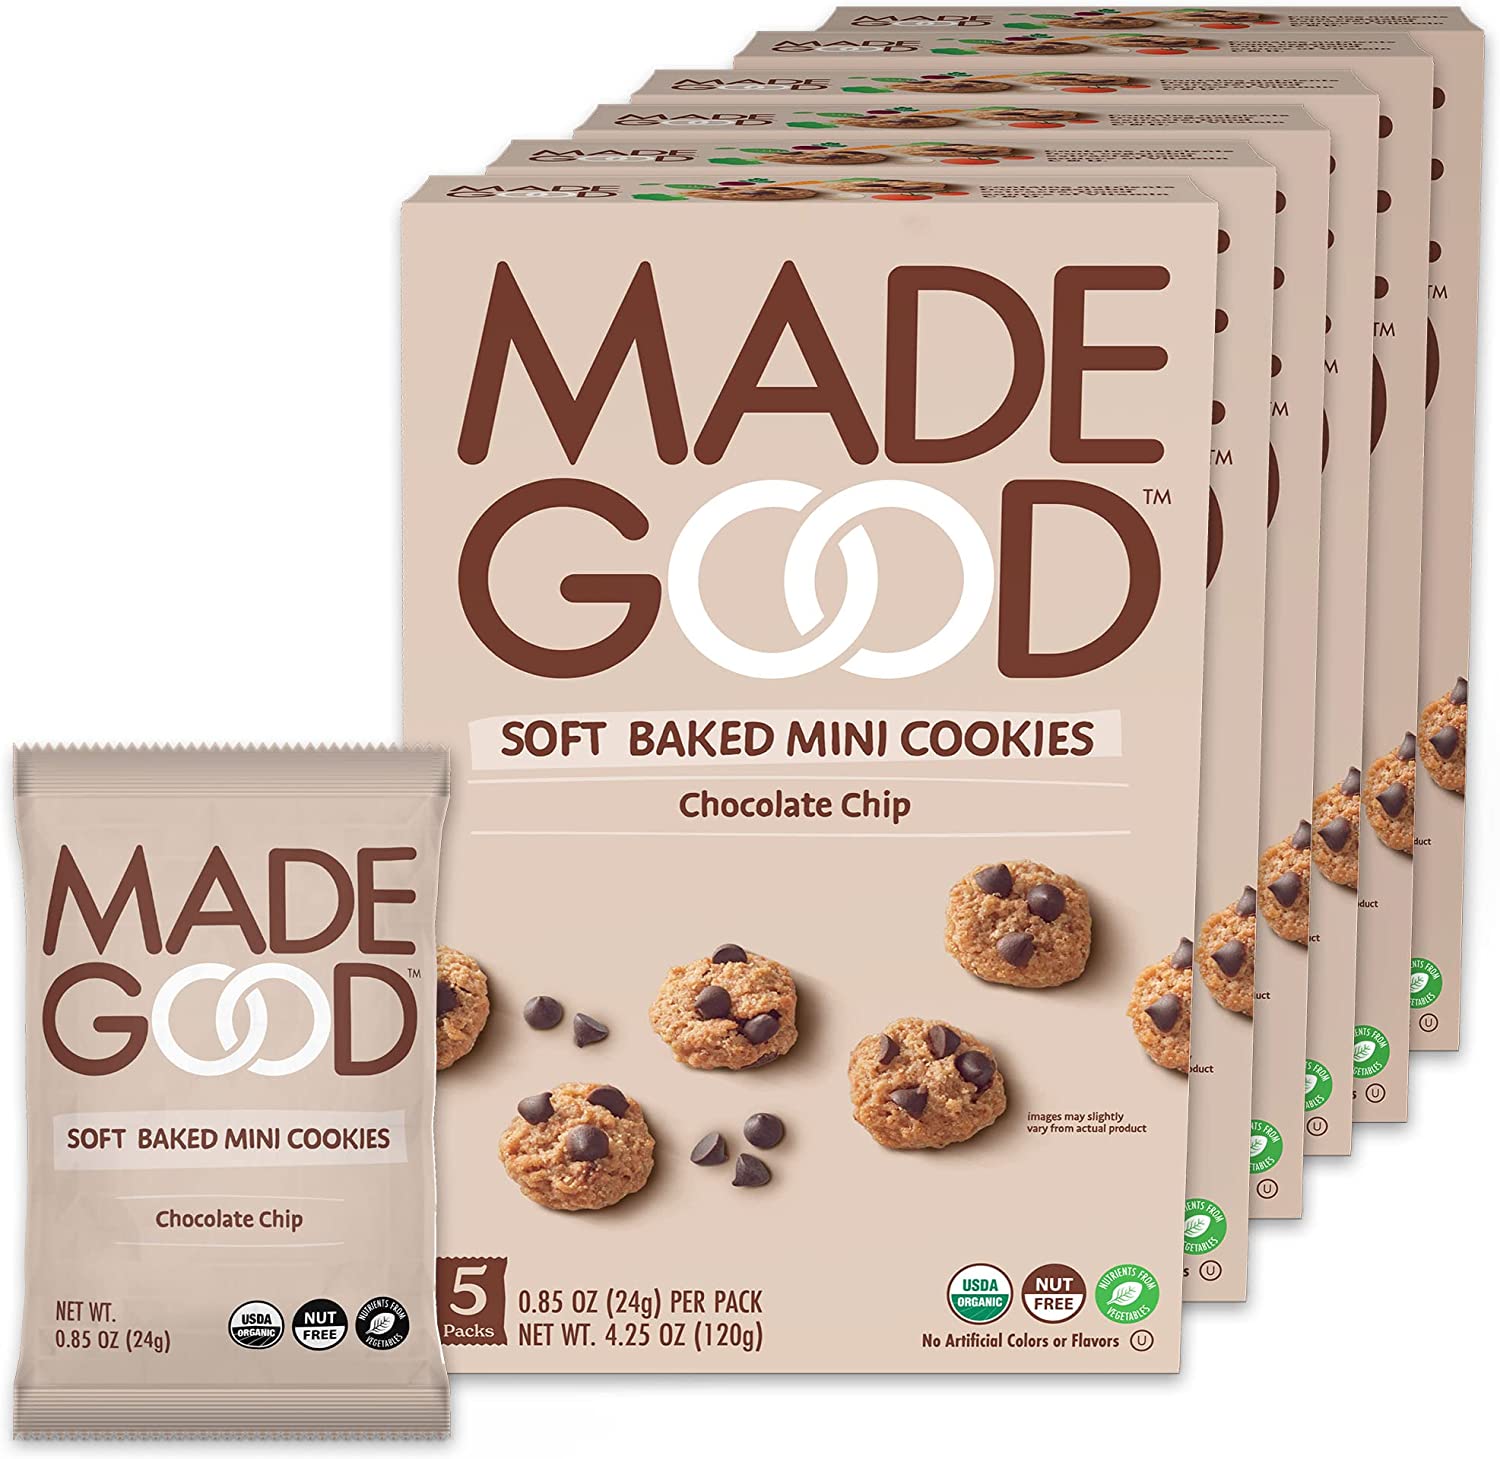 MadeGood Soft Baked Chocolate Chip Mini Cookies, Gluten Free & Safe For School Snacks, 30 Count